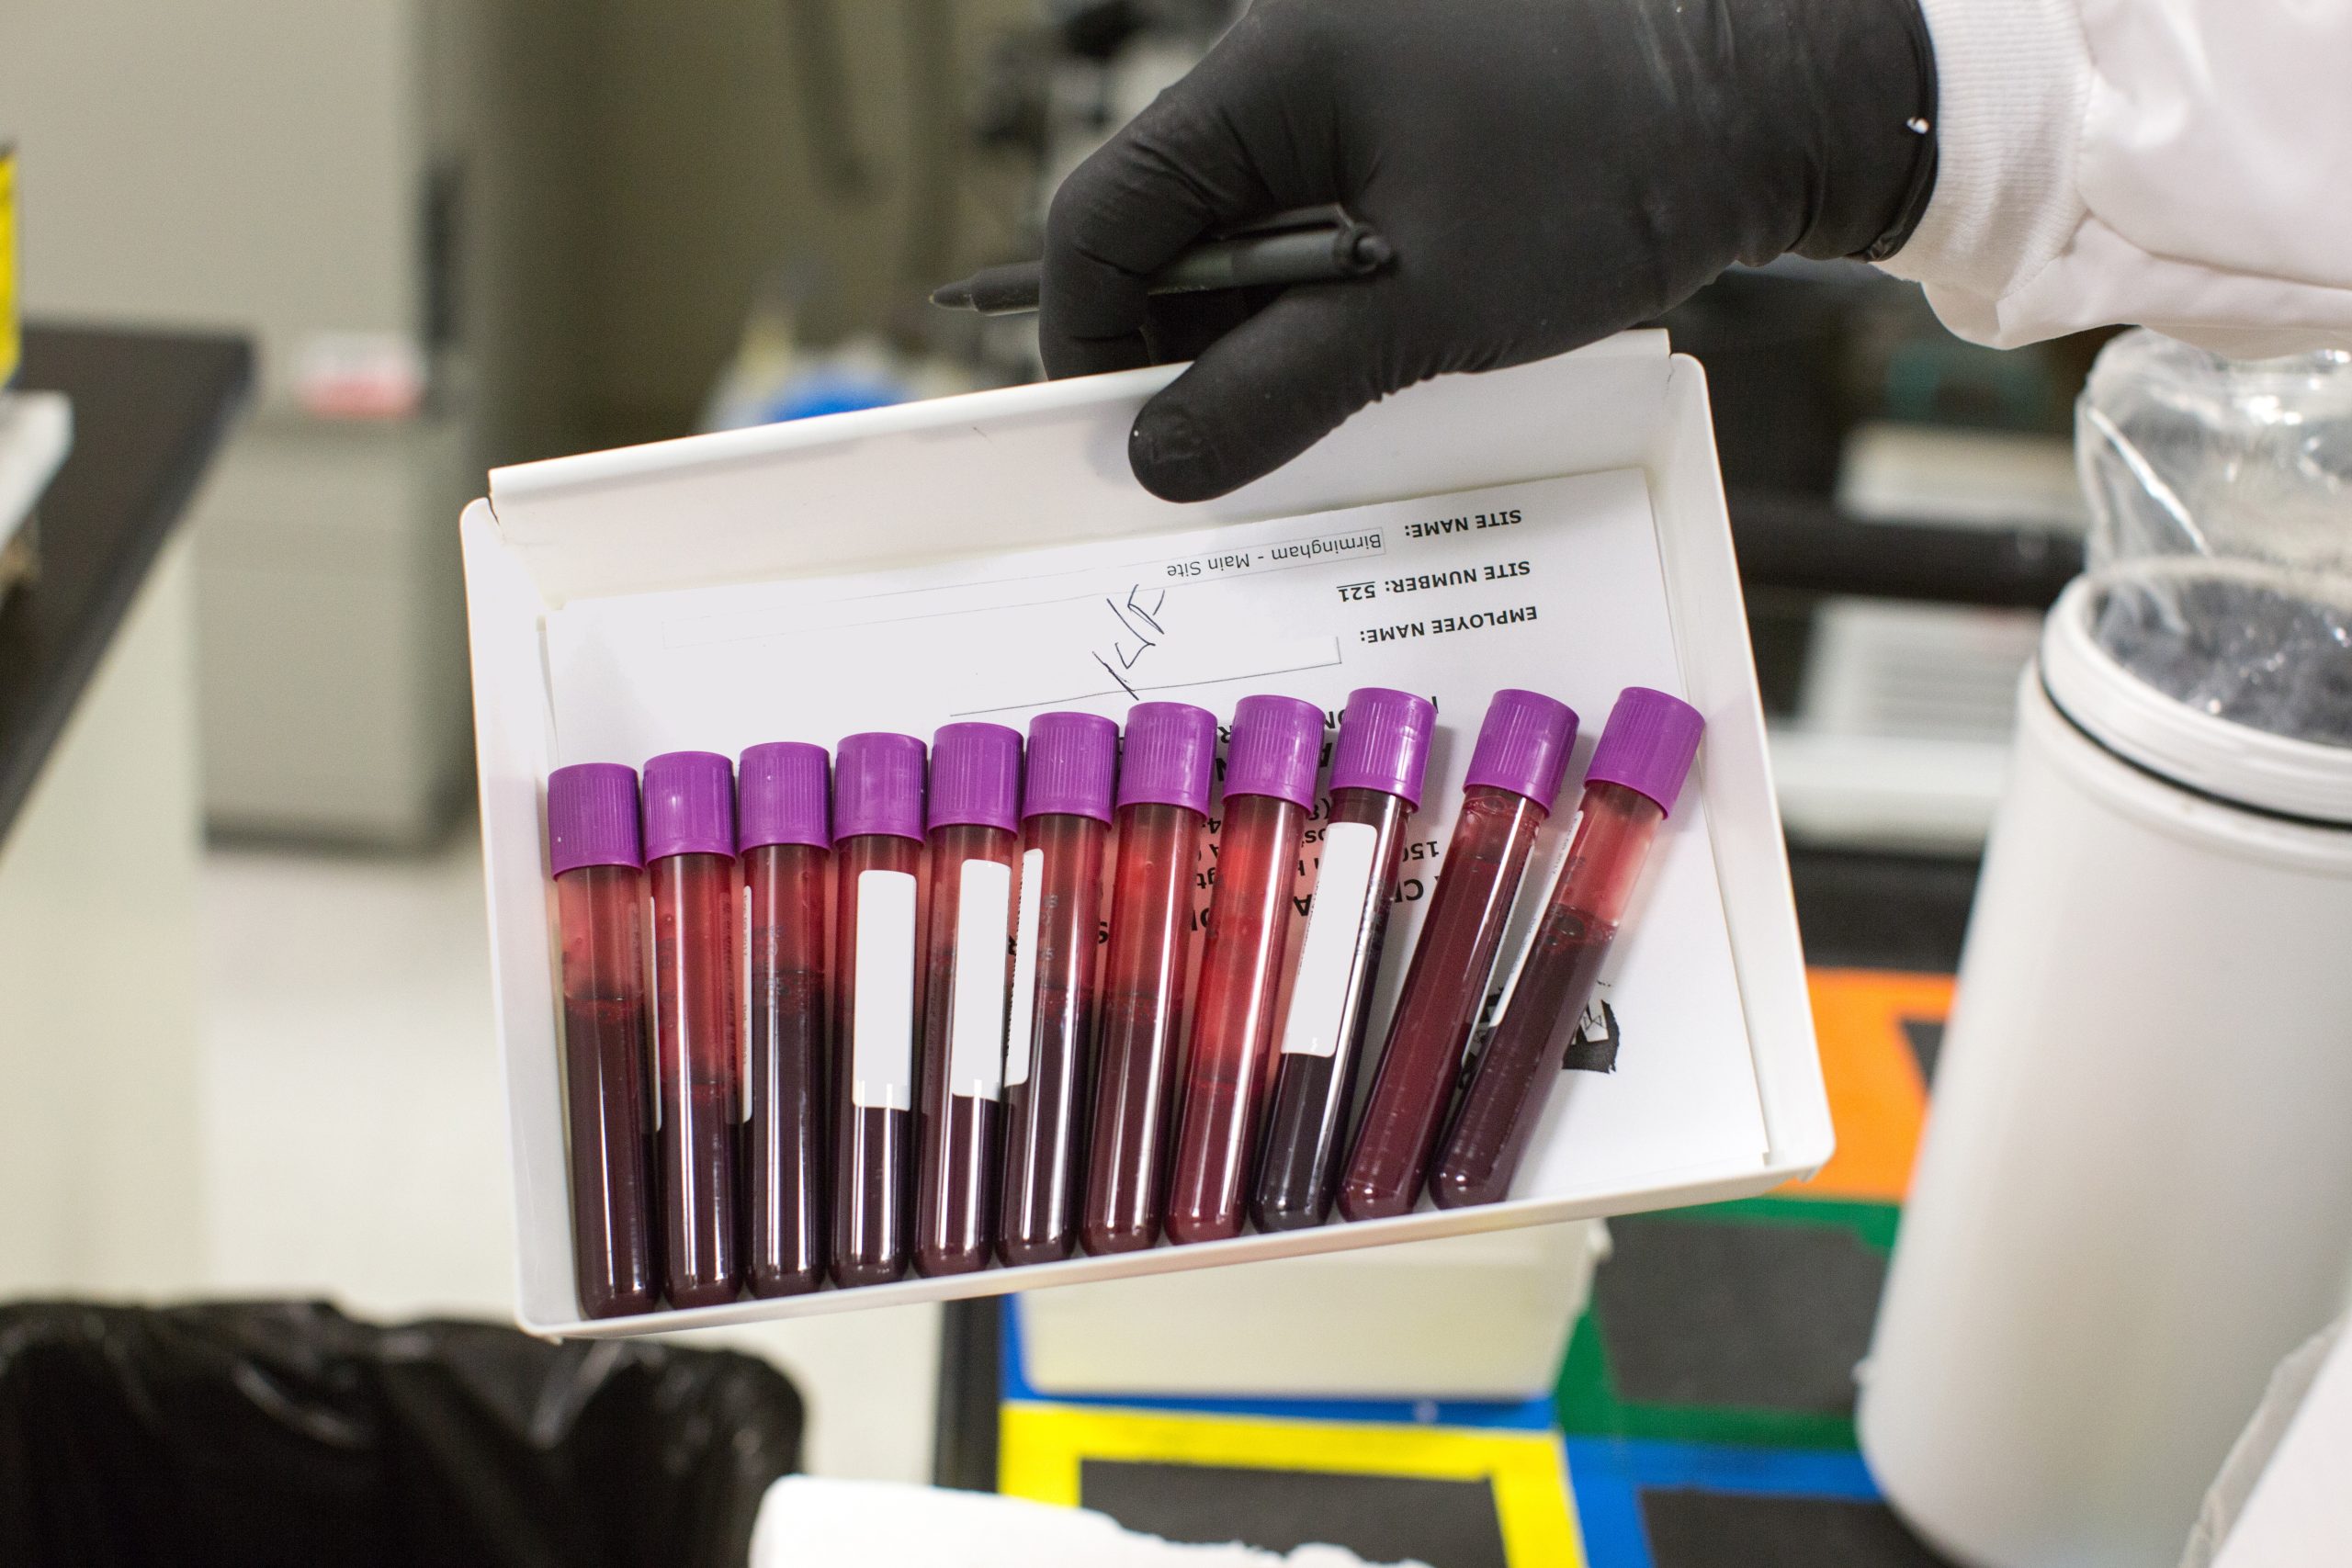 Blood samples collected from Veteran volunteers participating in VA’s Million Veteran Program. The samples are sent to a state-of-the-art biobank at the VA Boston Healthcare System, where machines extract DNA, proteins, and other molecules for genetic analysis. (MVP)